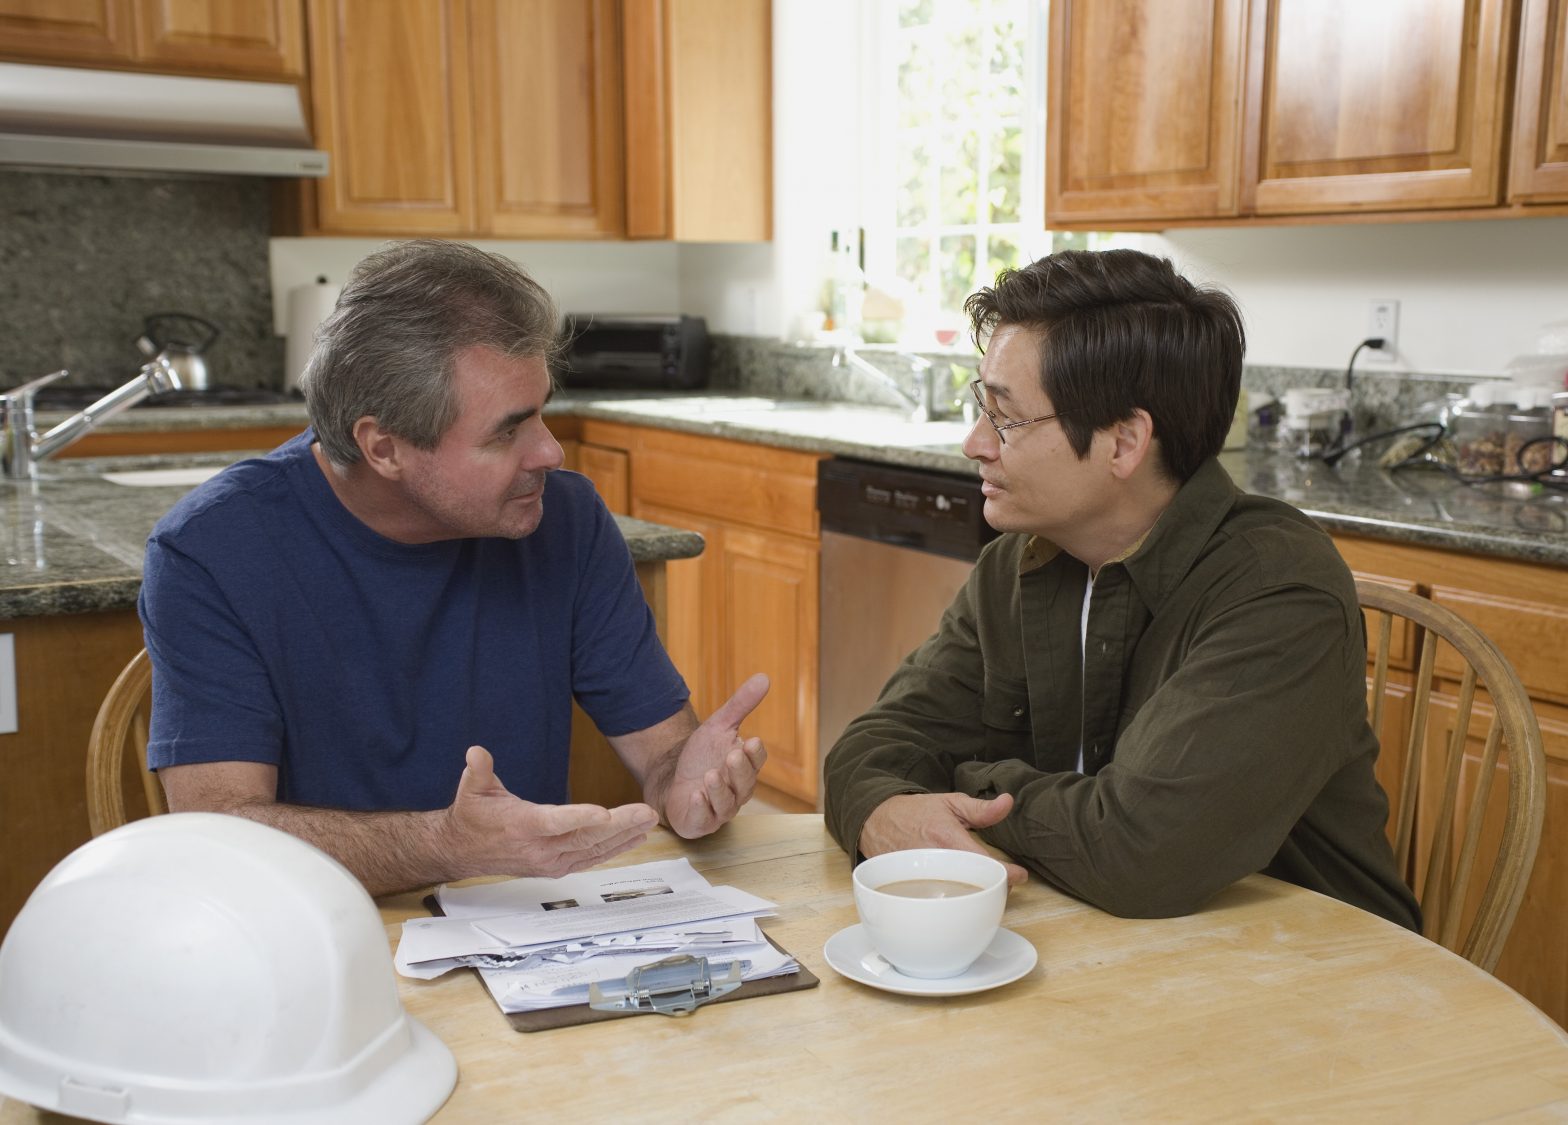 15 Questions to Ask a Contractor Before Hiring Them